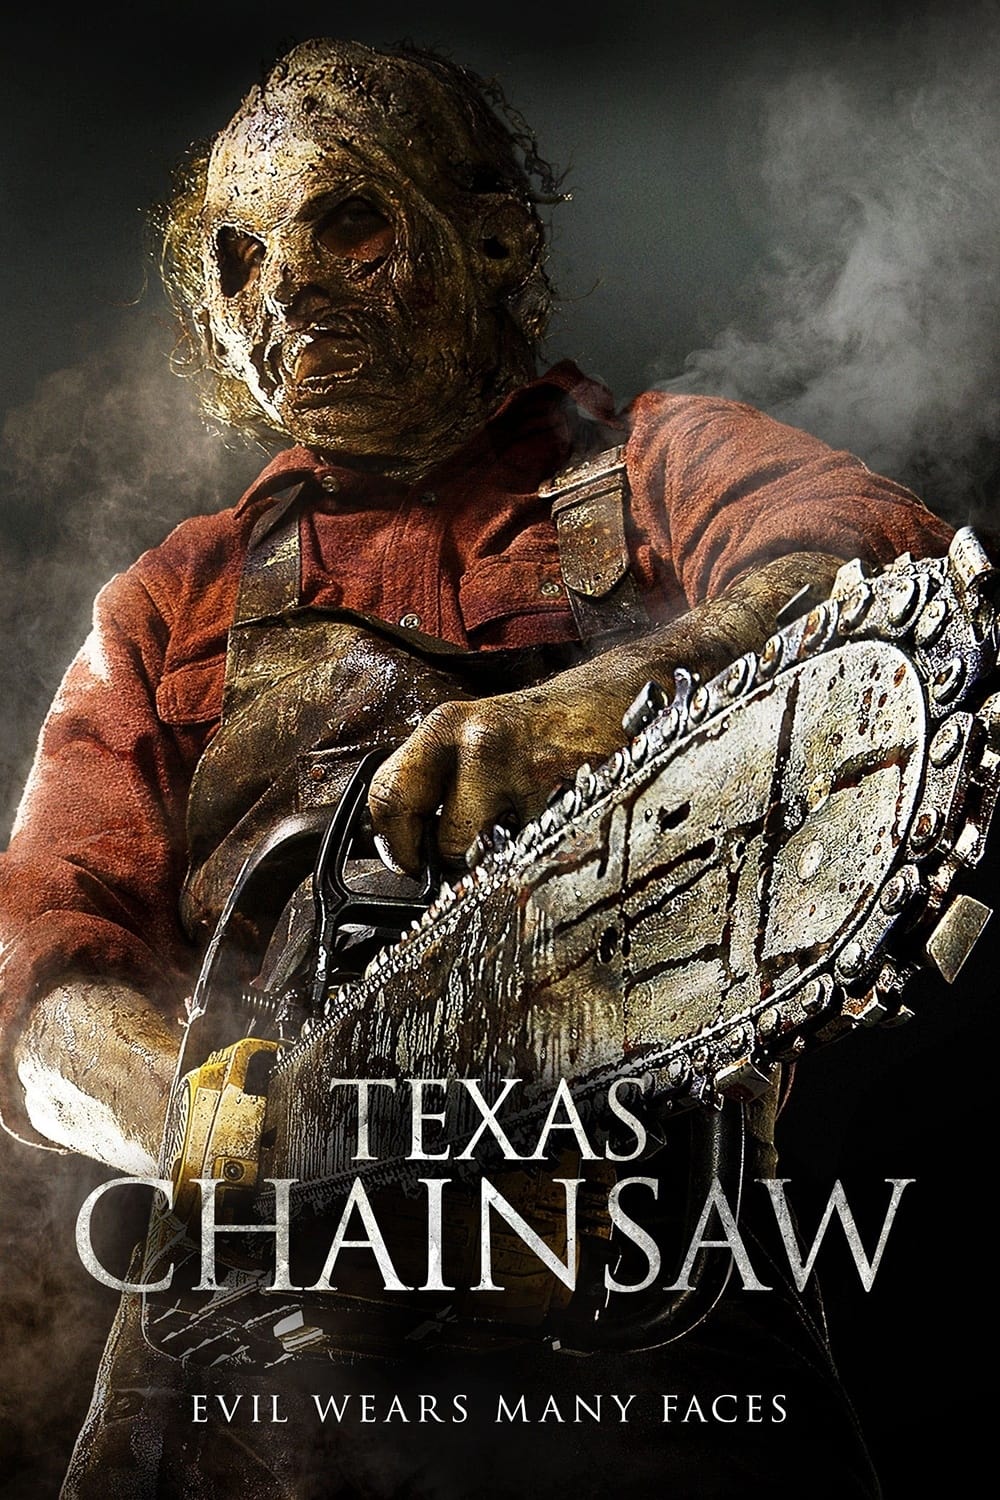 Texas Chainsaw 3D Movie poster